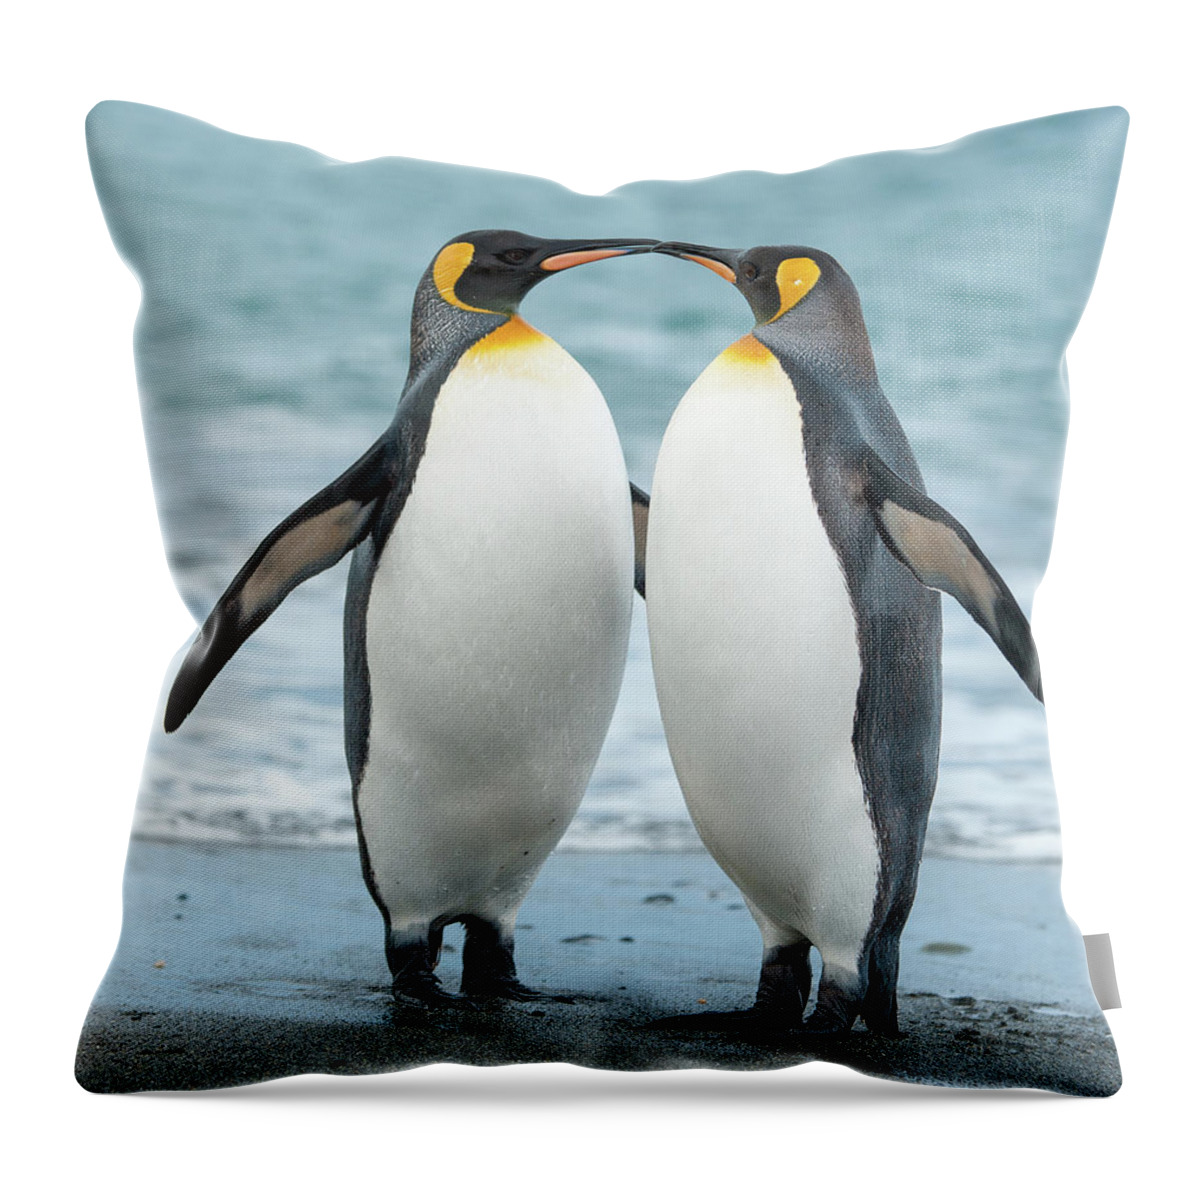 Black Color Throw Pillow featuring the photograph Two King Penguins On A Beach In South by Elmvilla